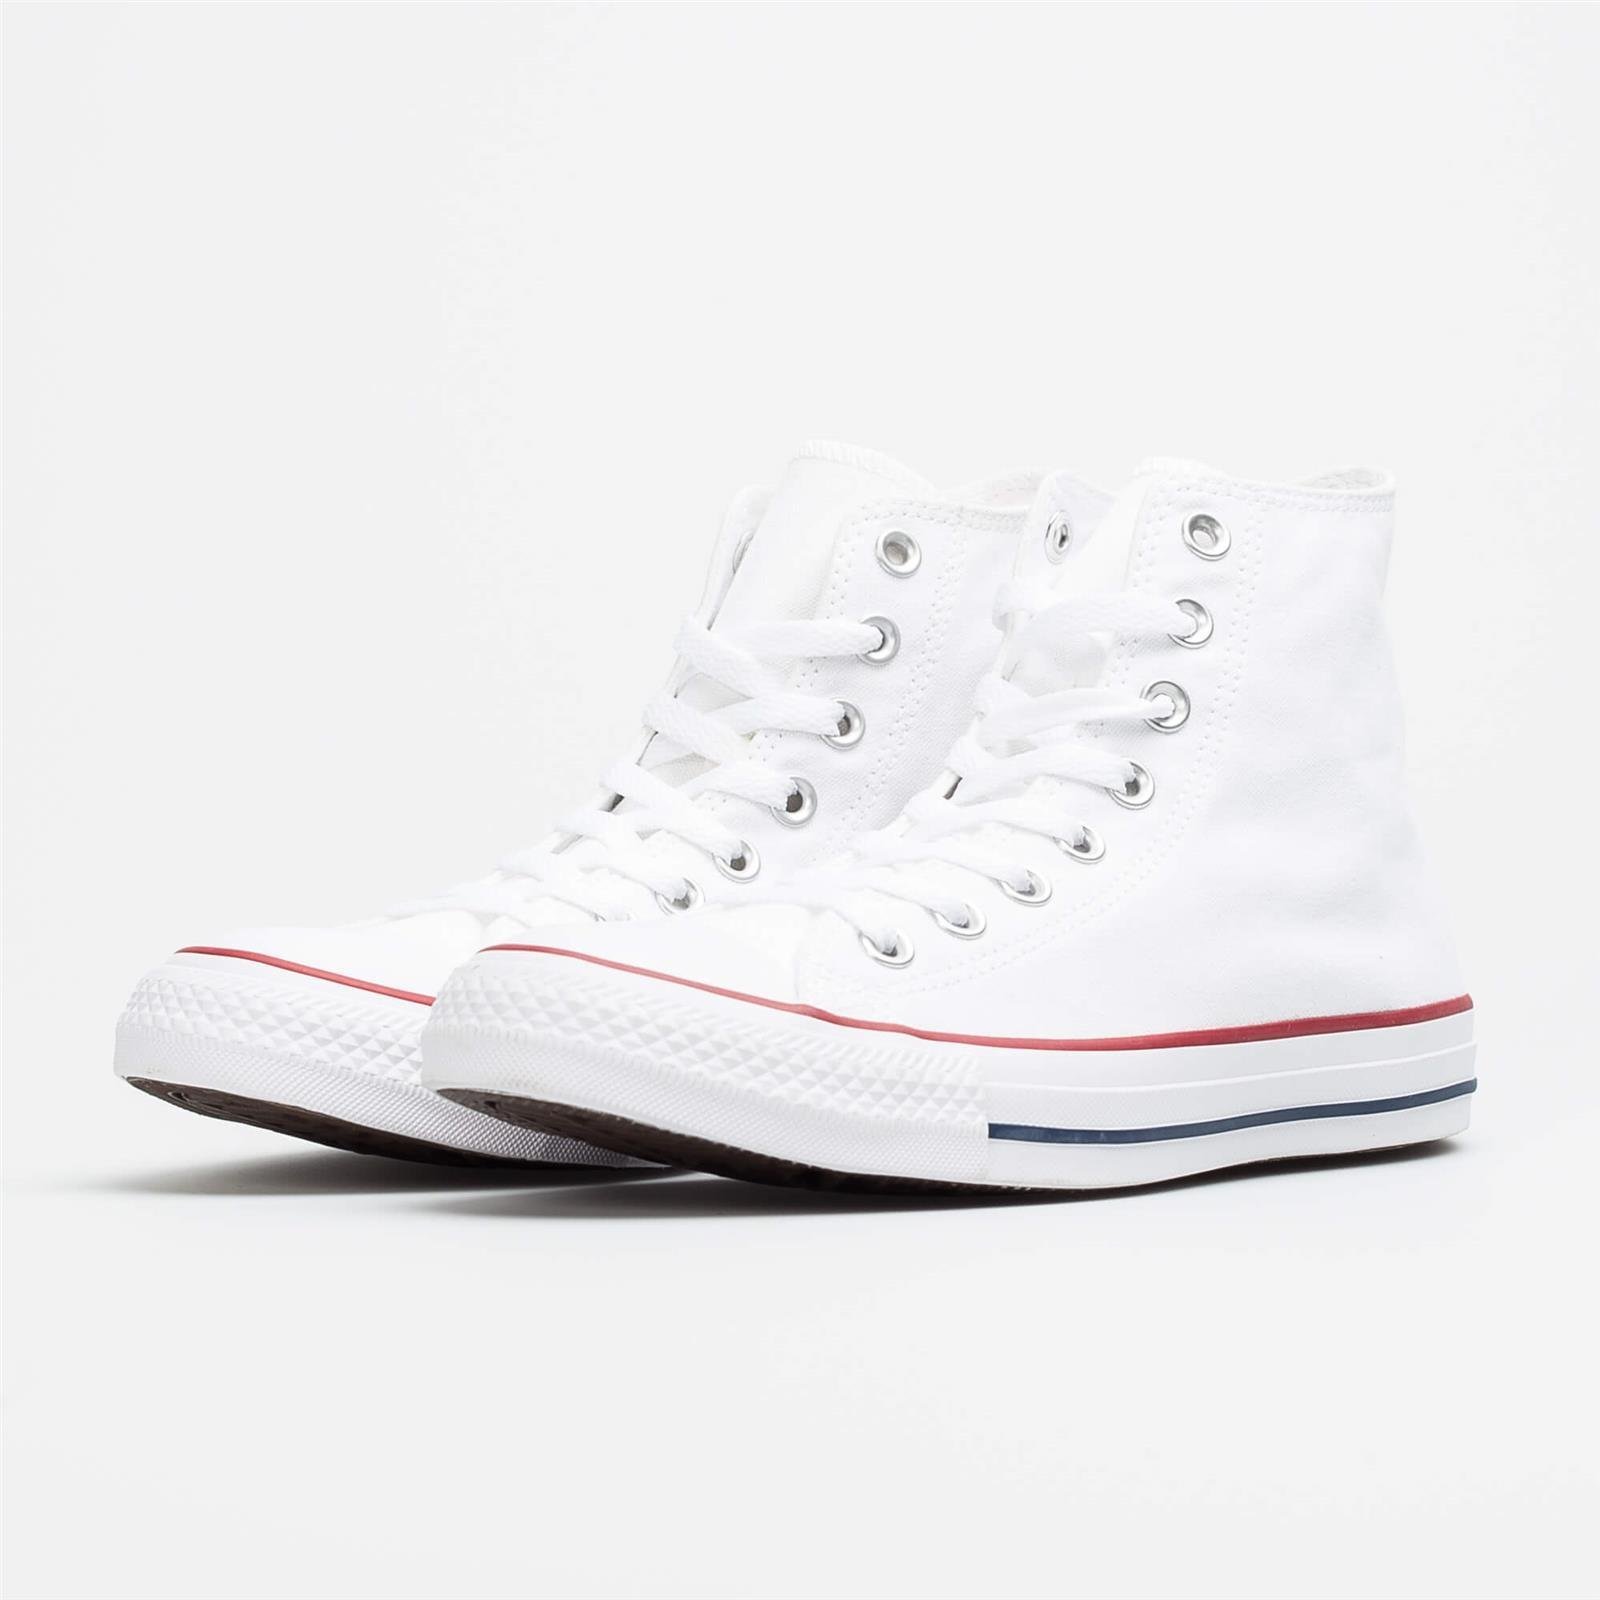 next disinfectant Slink cheapest converse all stars uk Tentative name ...